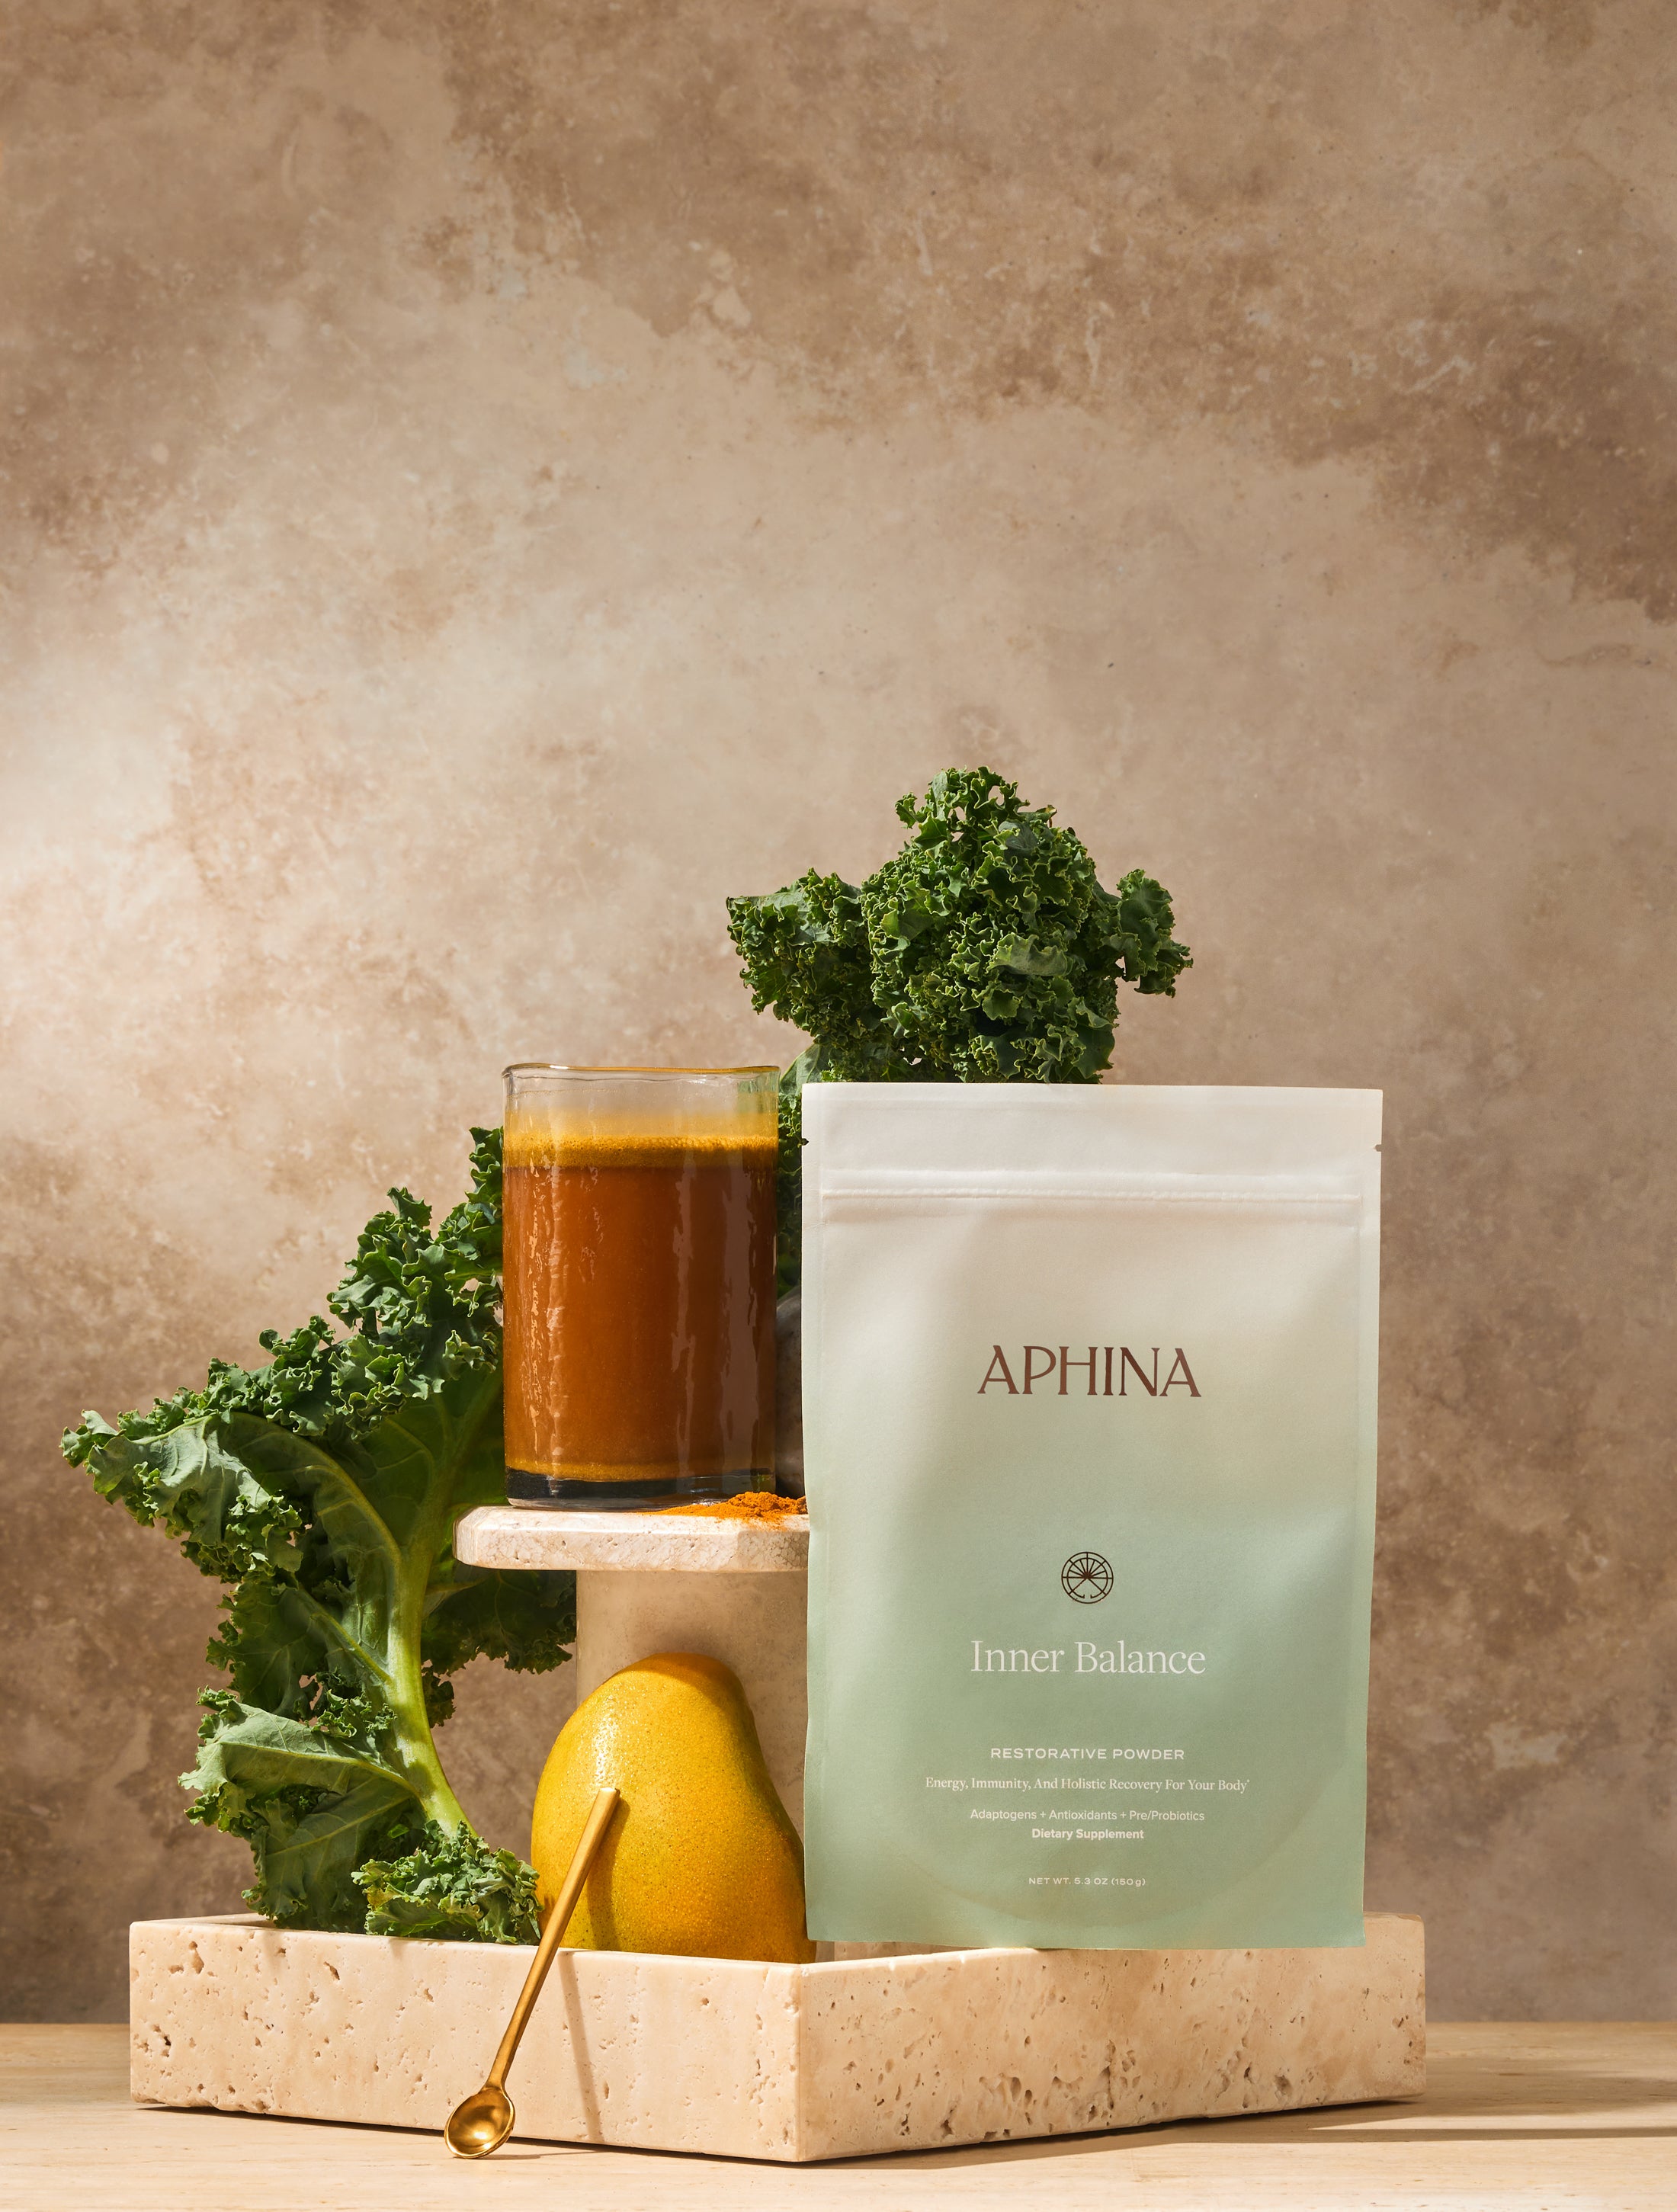 Aphina | Beauty inspired, high performance supplements